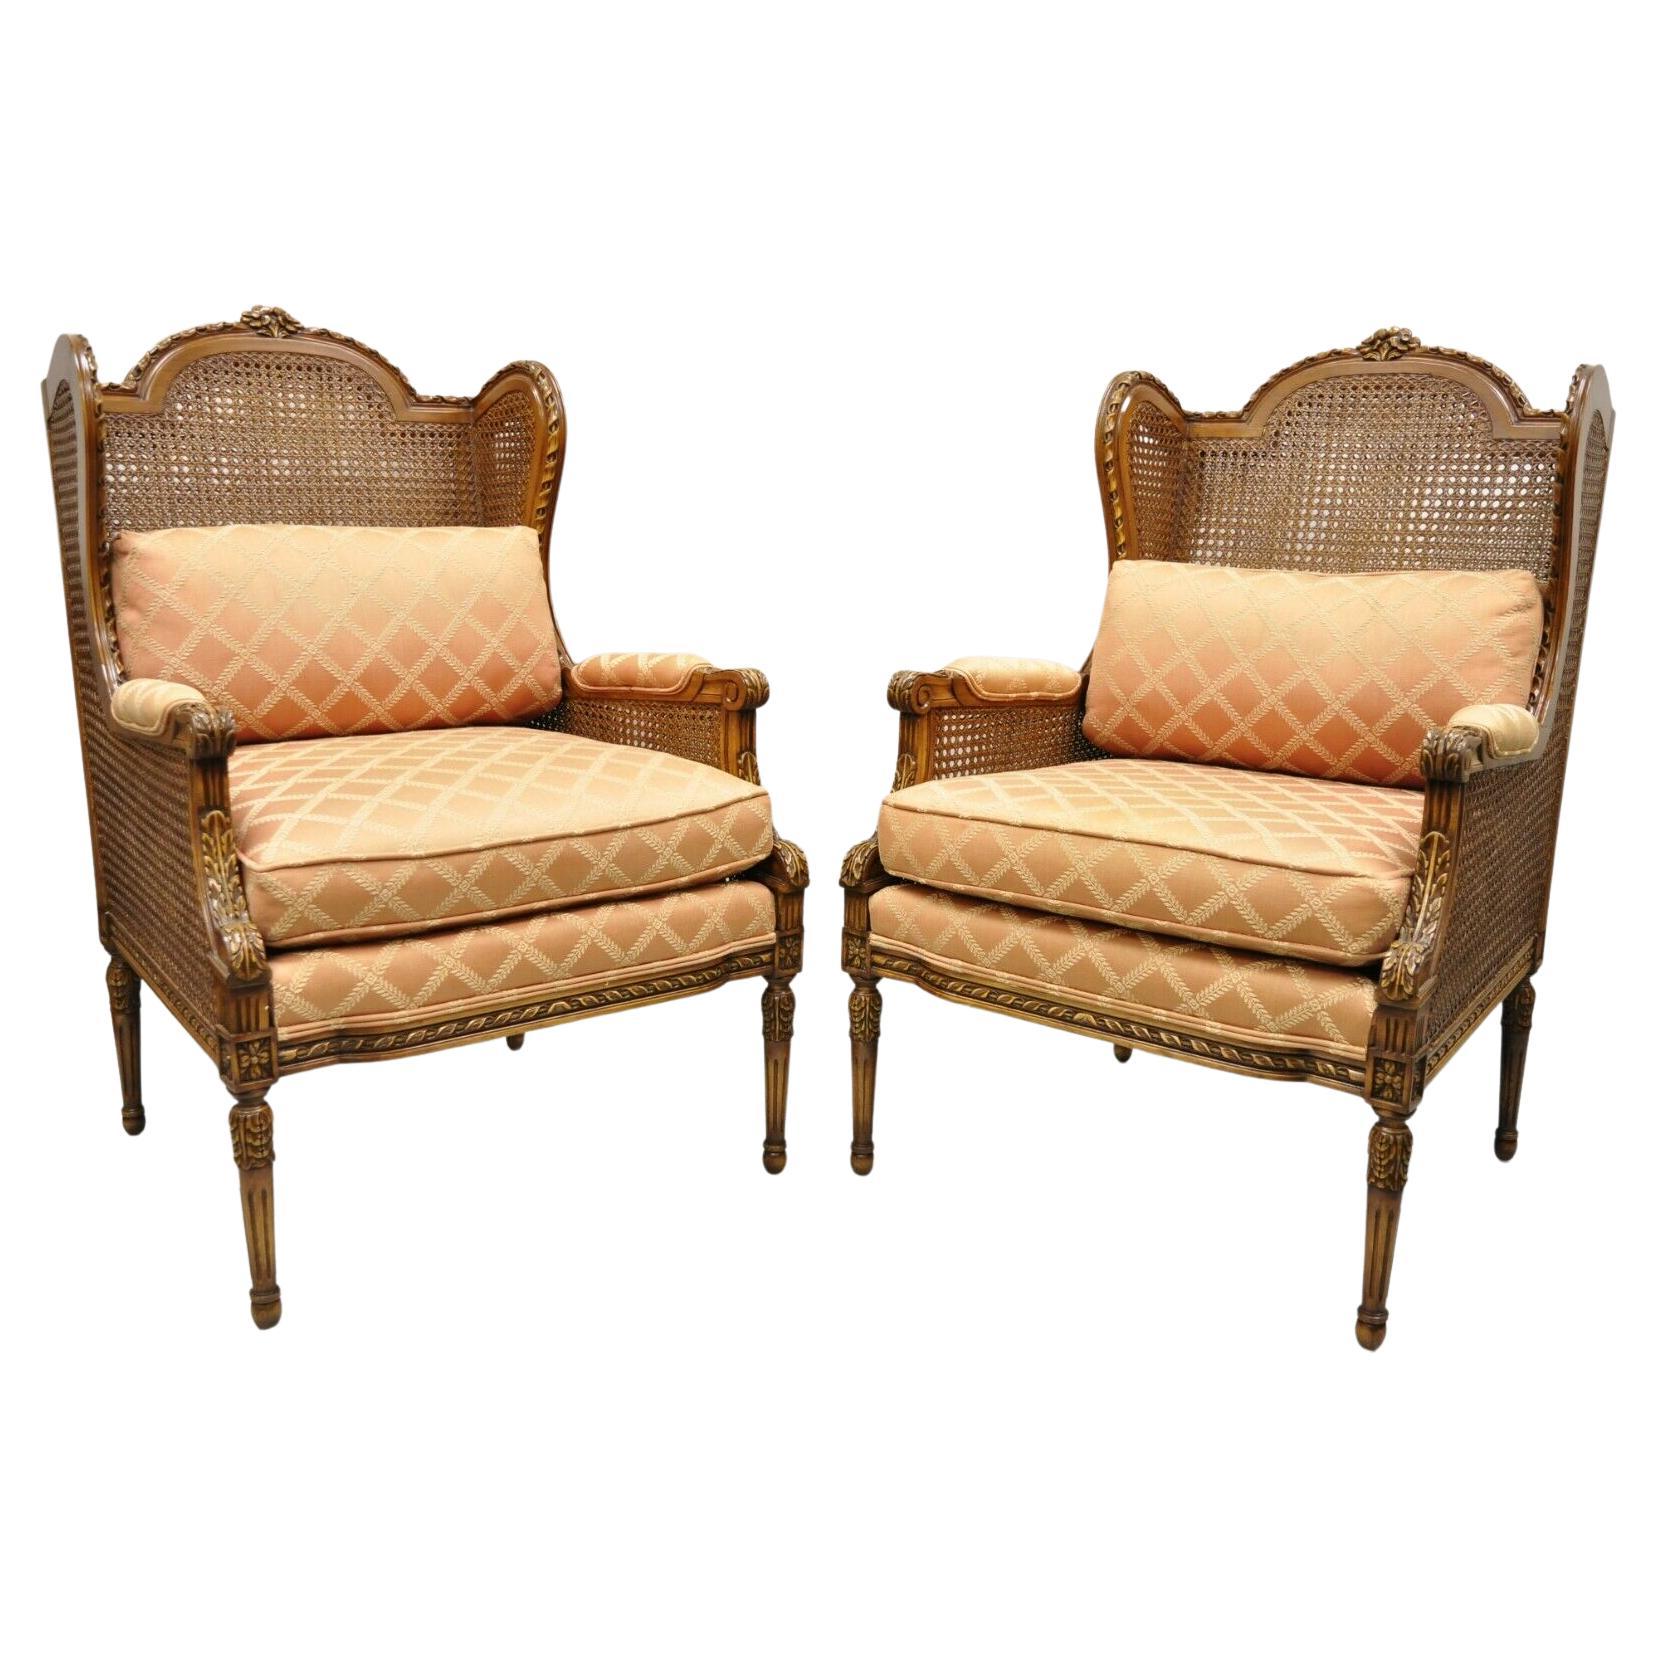 Vintage French Louis XVl Style Cane Bergere Lounge Chairs, a Pair